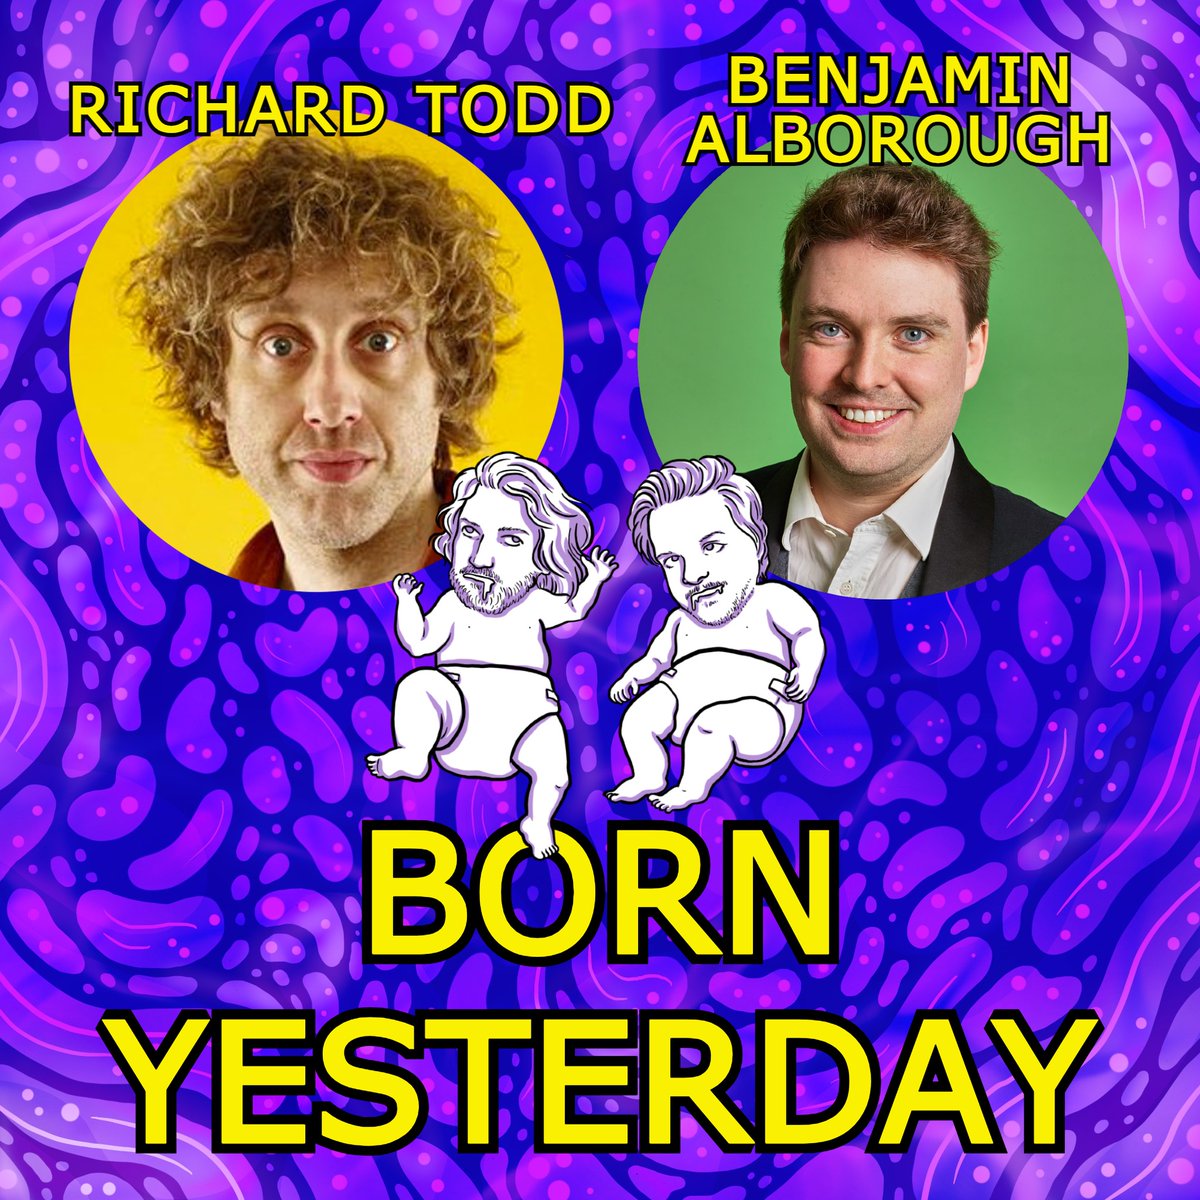 Well lookie here it's a brand new episode of @BYesterdayPod with @richardtoddtodd and @BJAlborough joining @SomeNiceFun and I. Listen to us via your preferred podcast app and leave us a five star review! open.spotify.com/show/1hVArM2zQ…